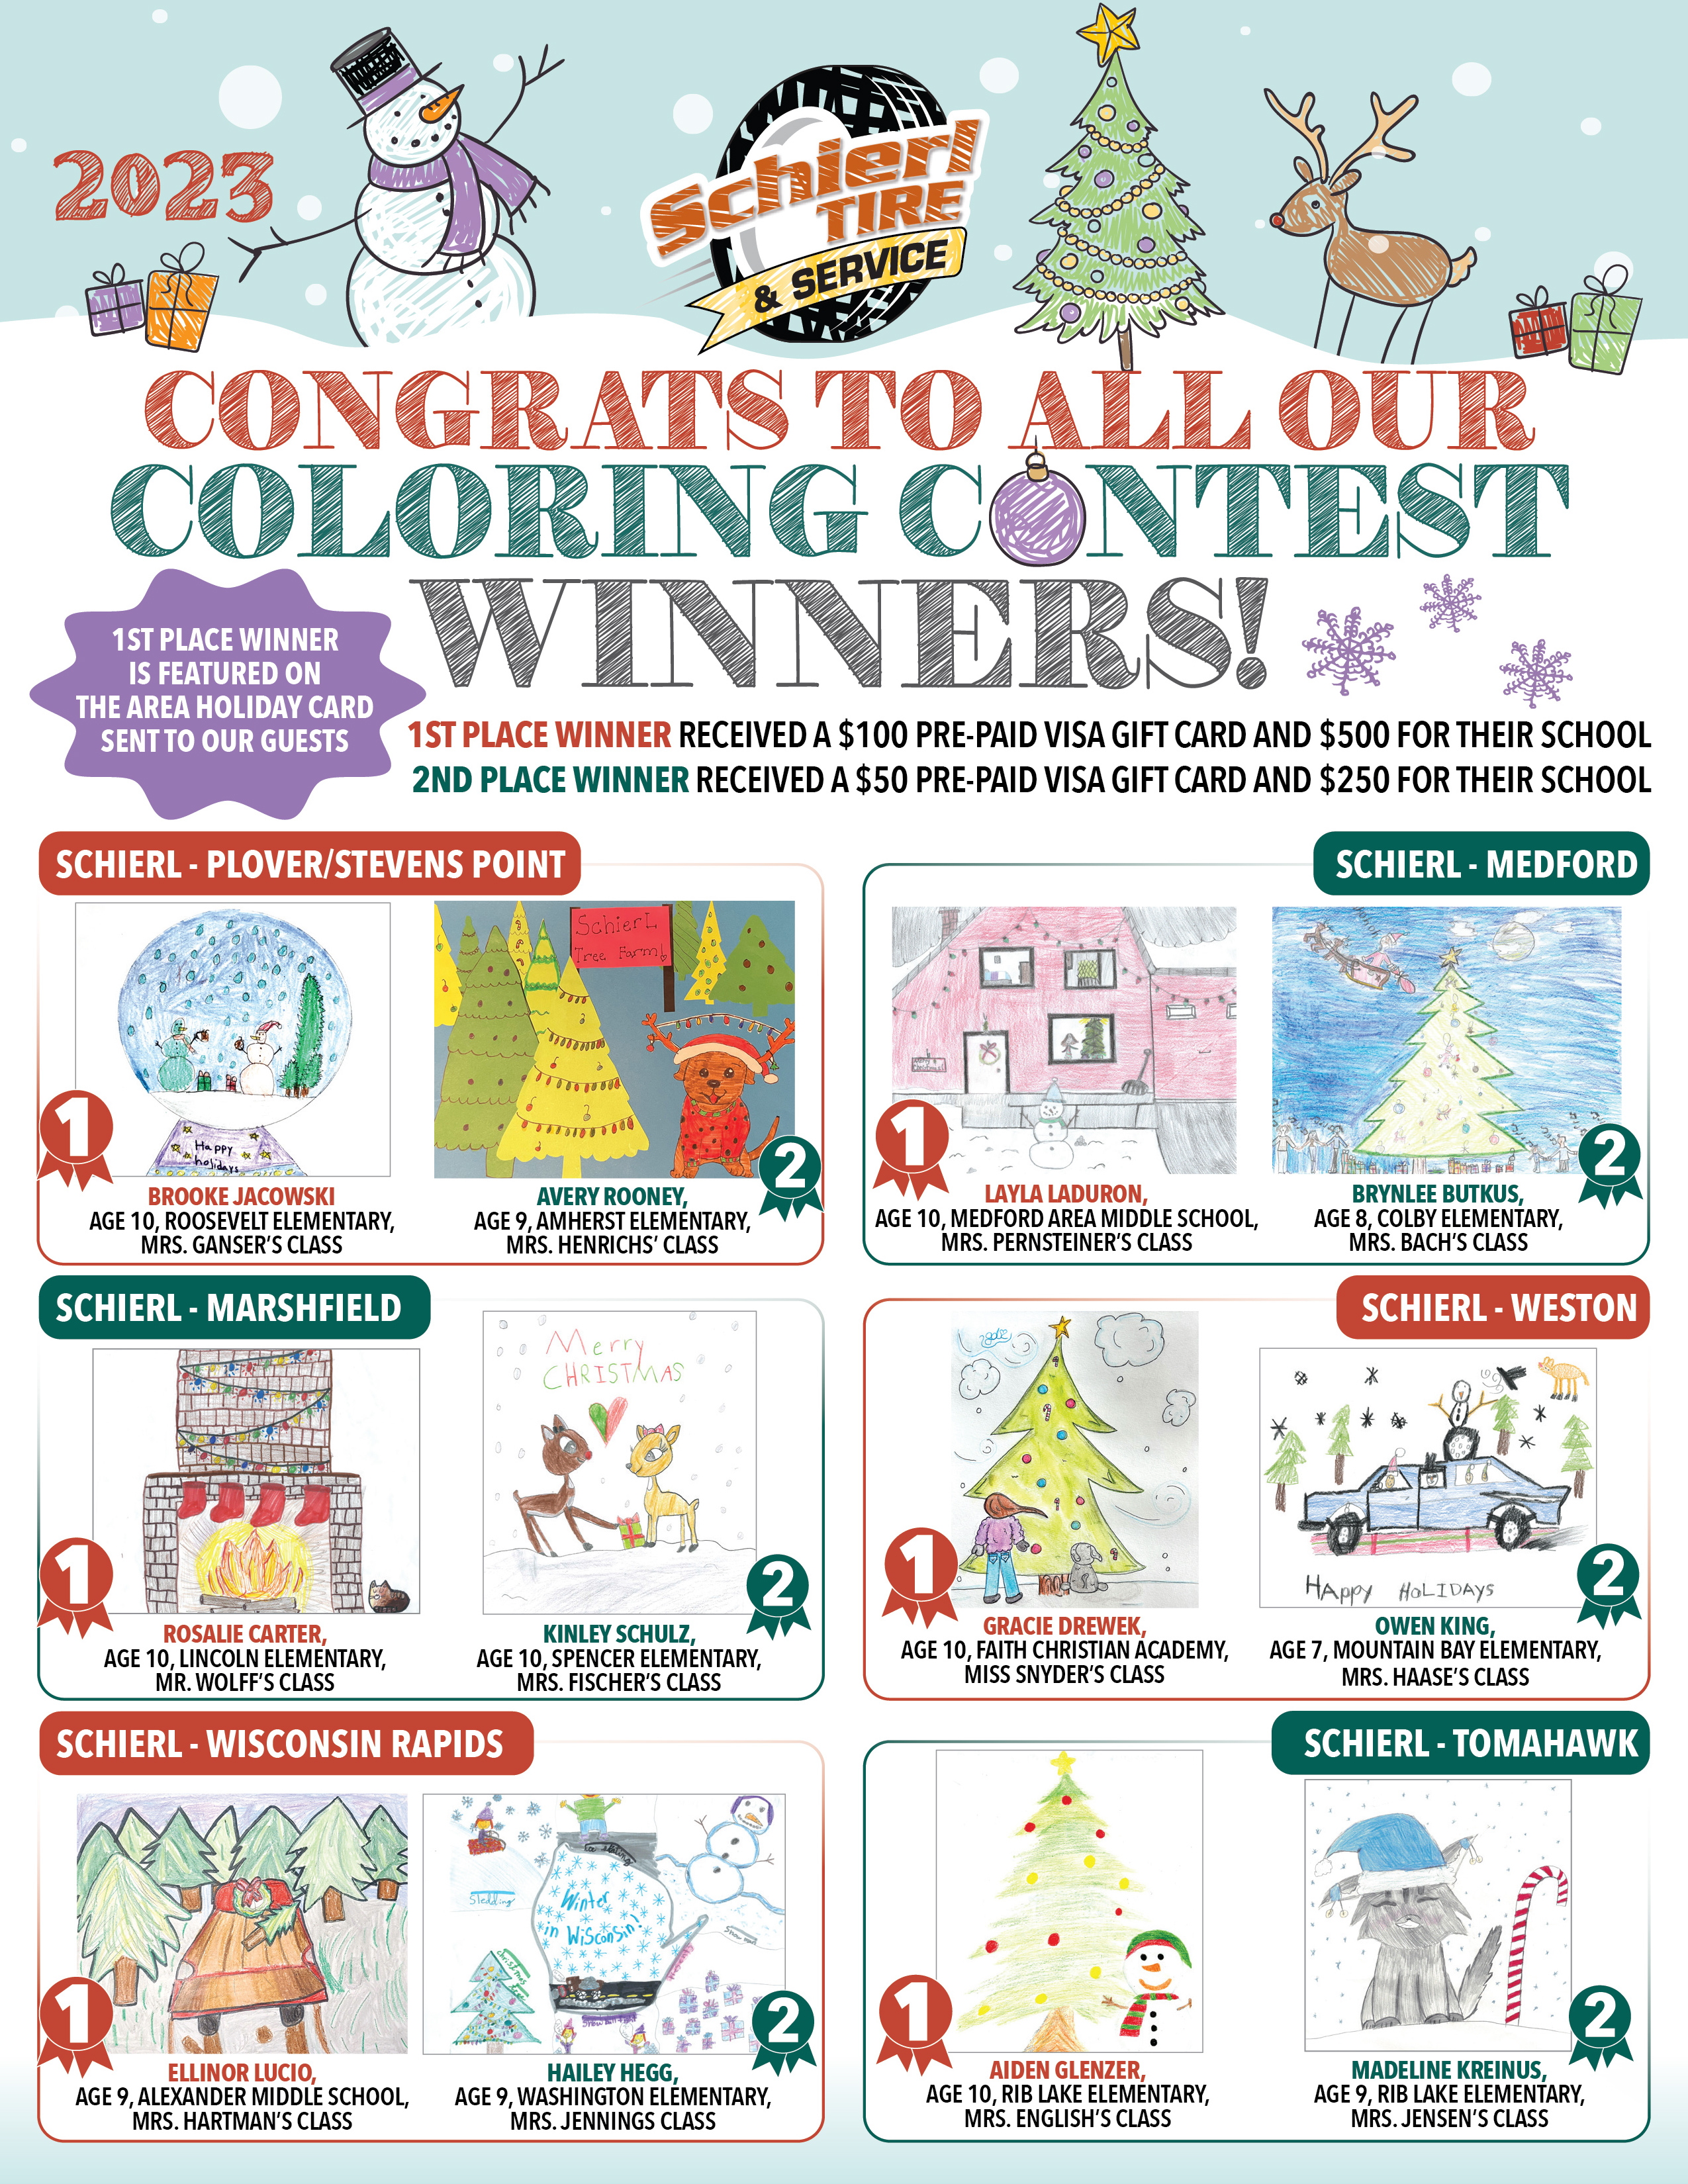 2023 Holiday Coloring Contest Winners - Medford, WI 